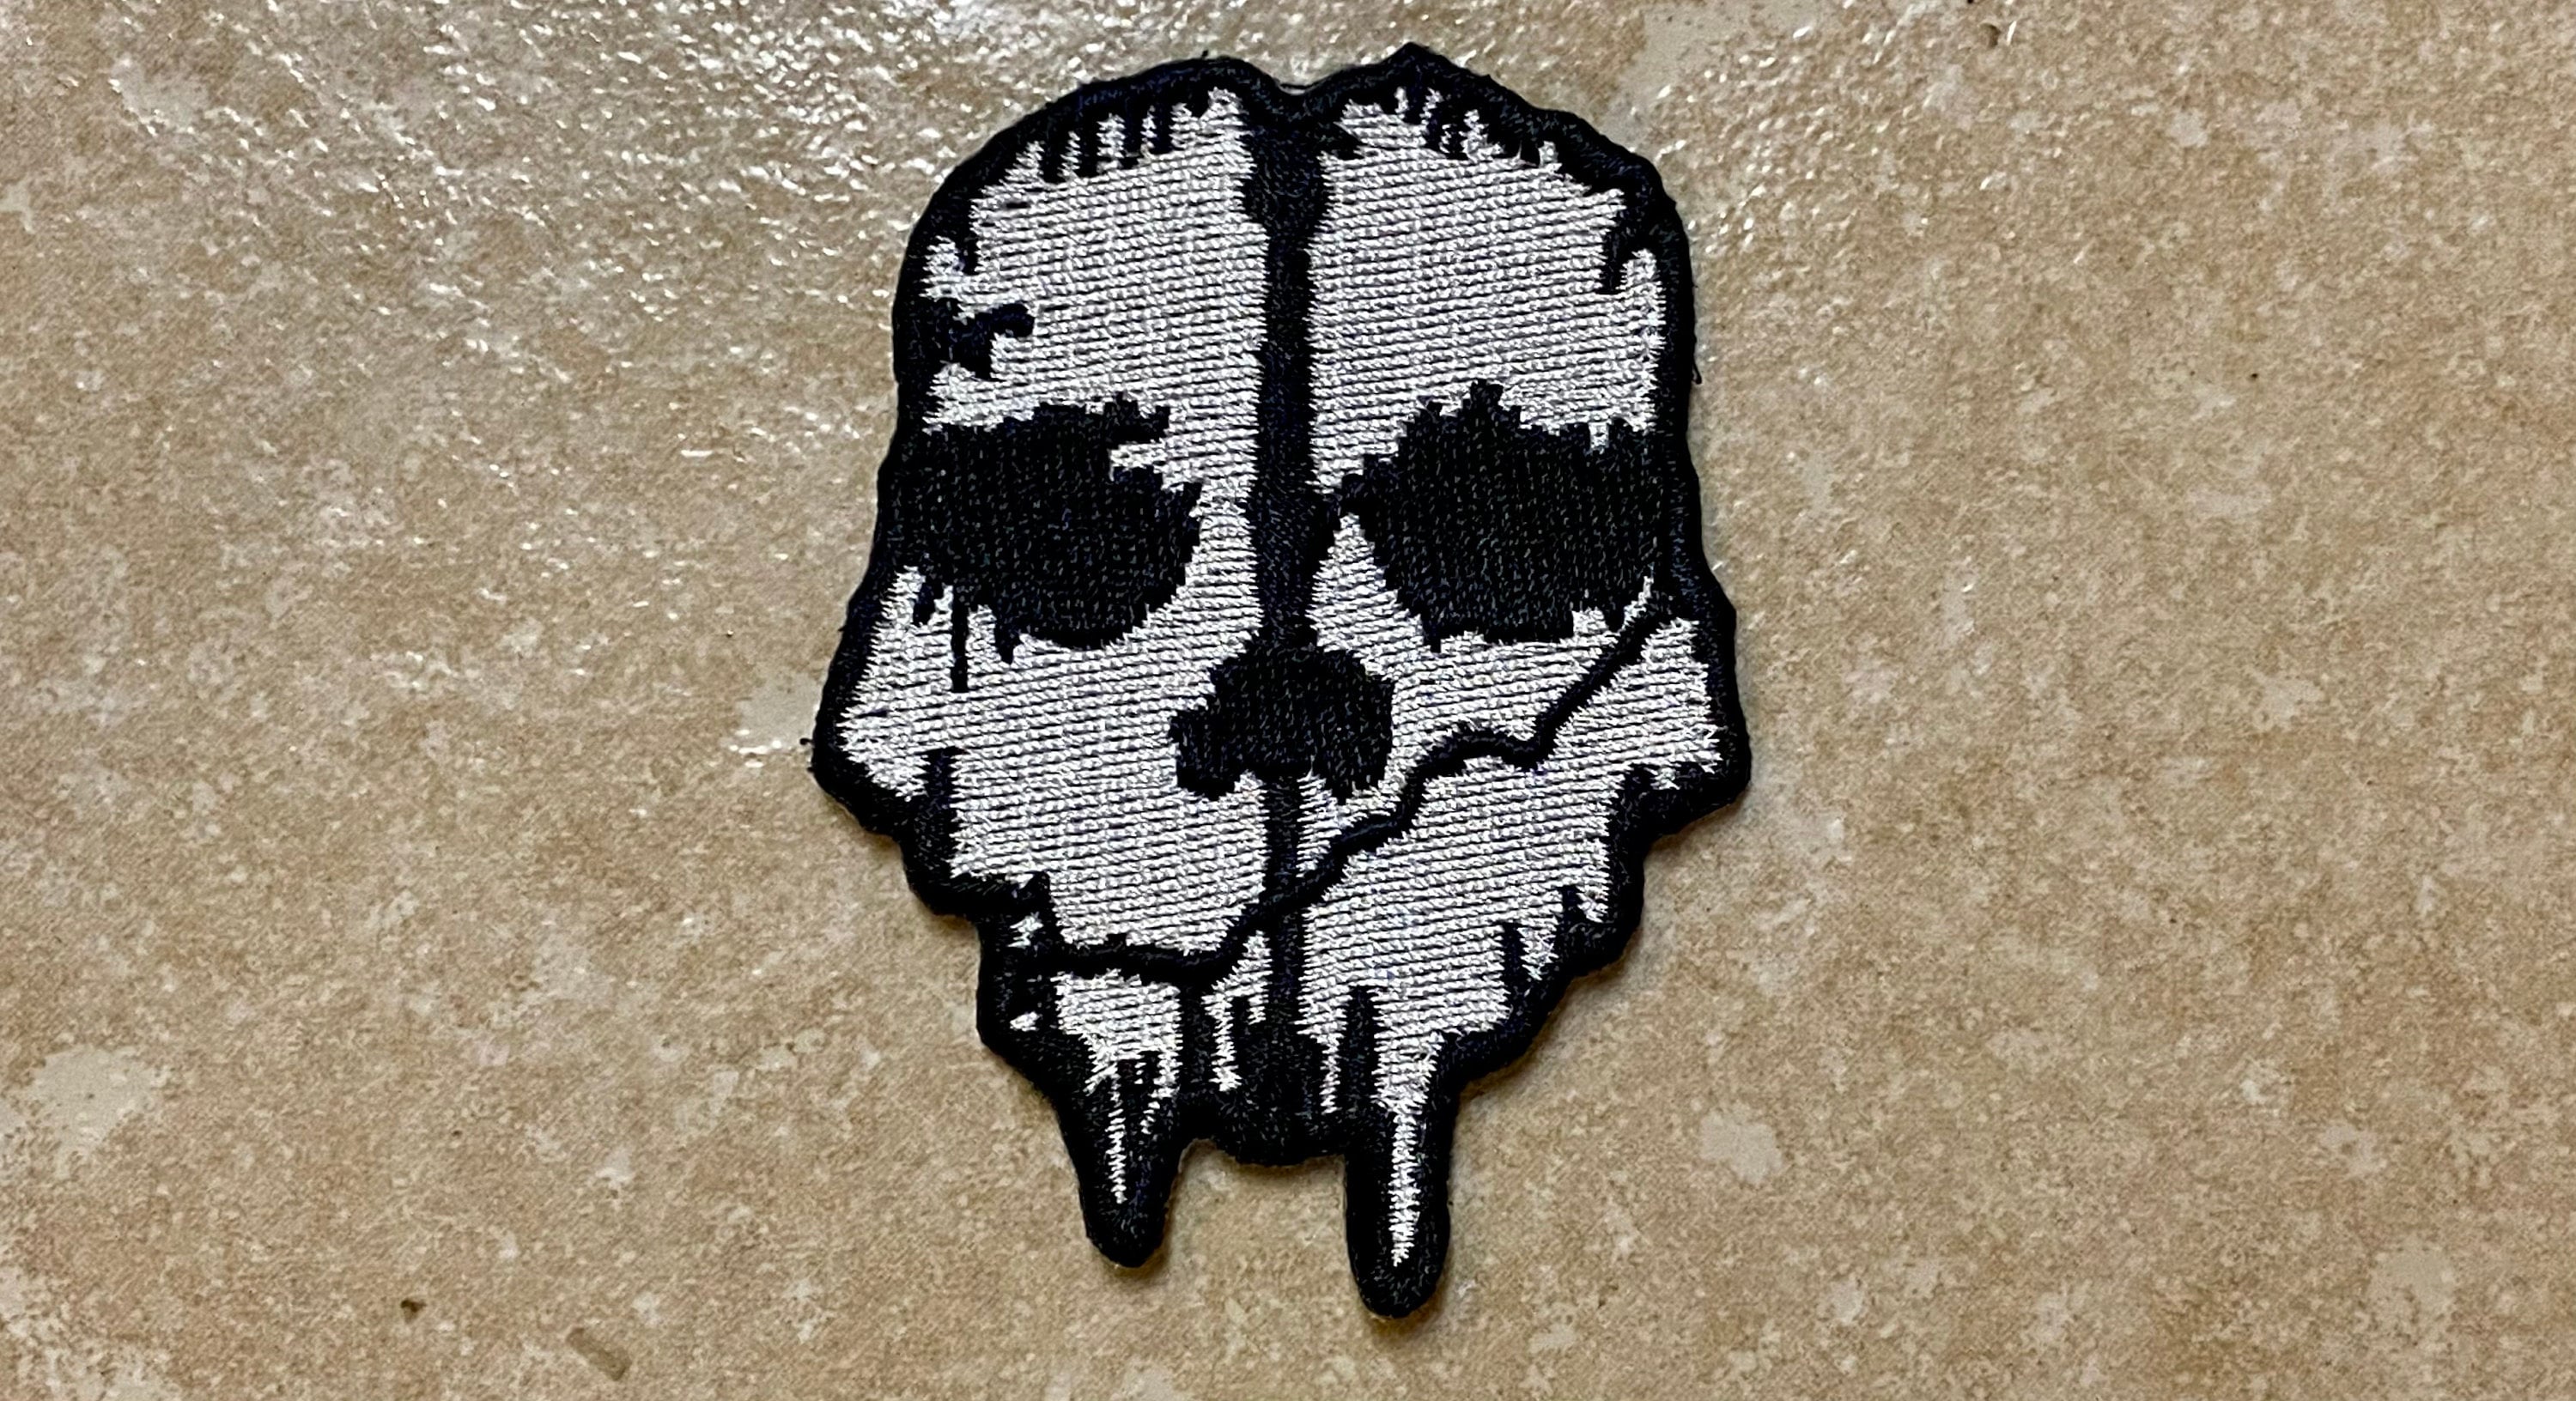 Call Of Duty Ghost Mask Skull Patches, Diy Embroidery Decorative